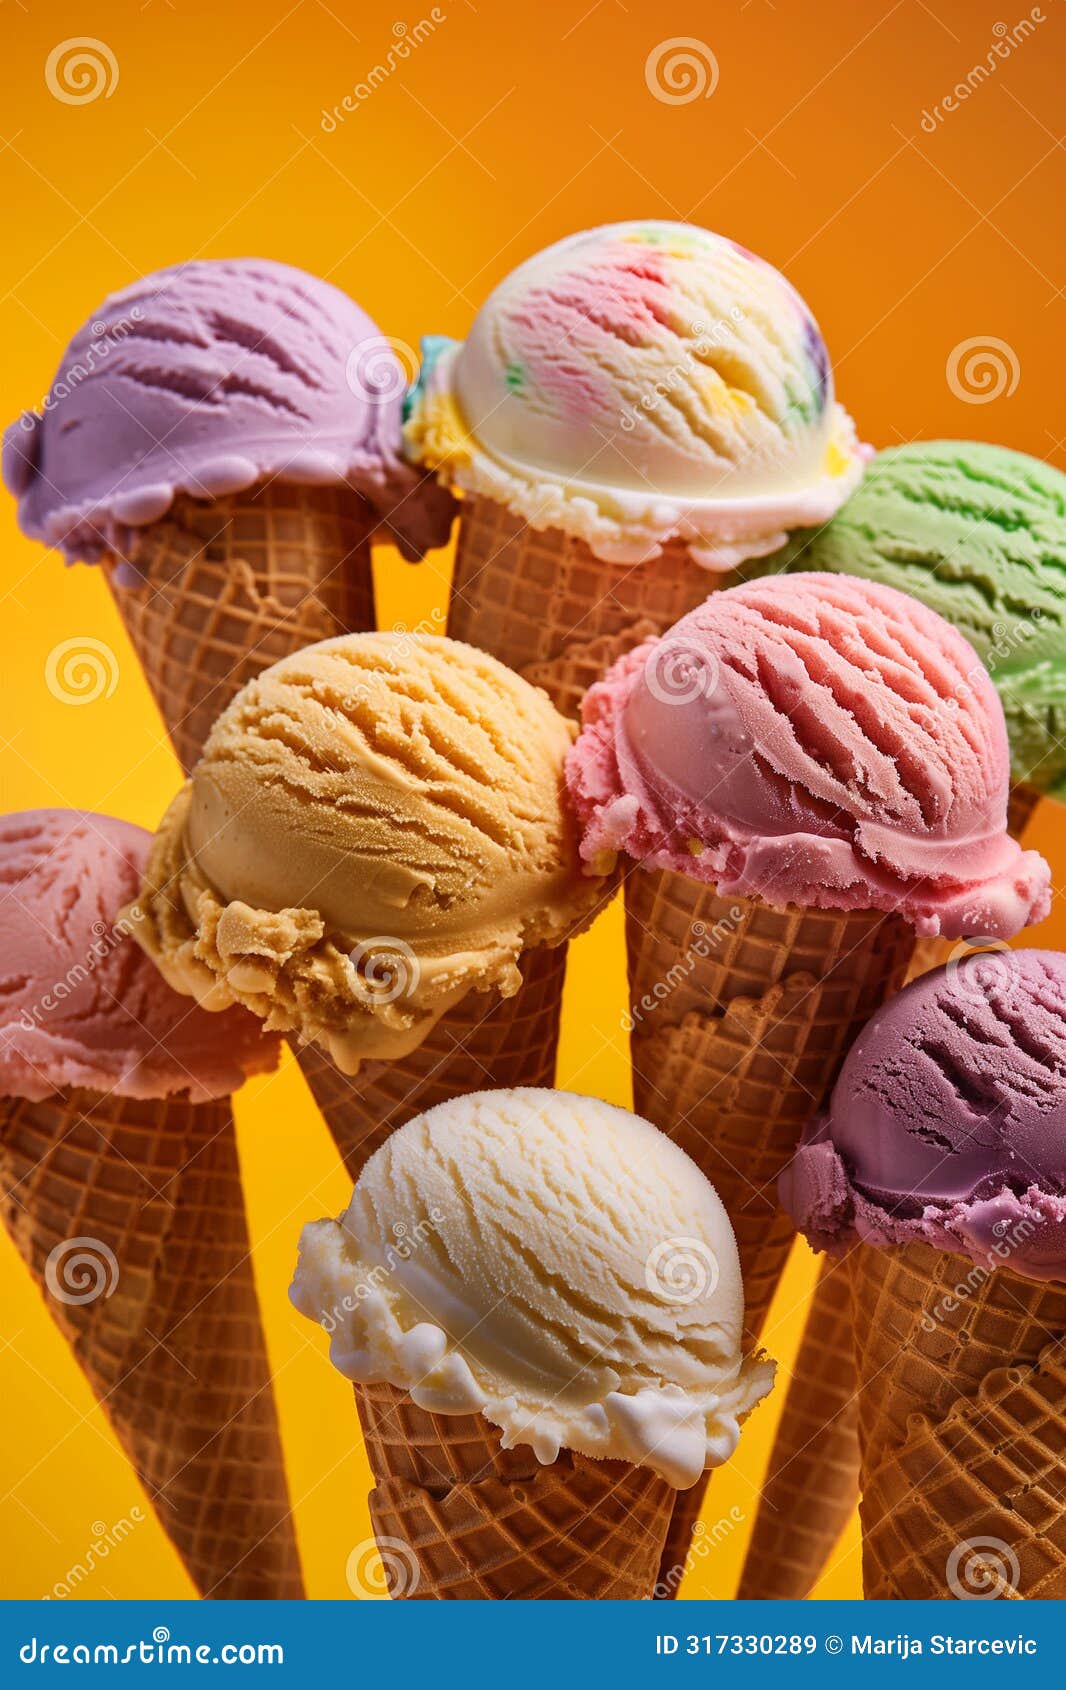 variety of ice cream cones with differenc flavours and colors